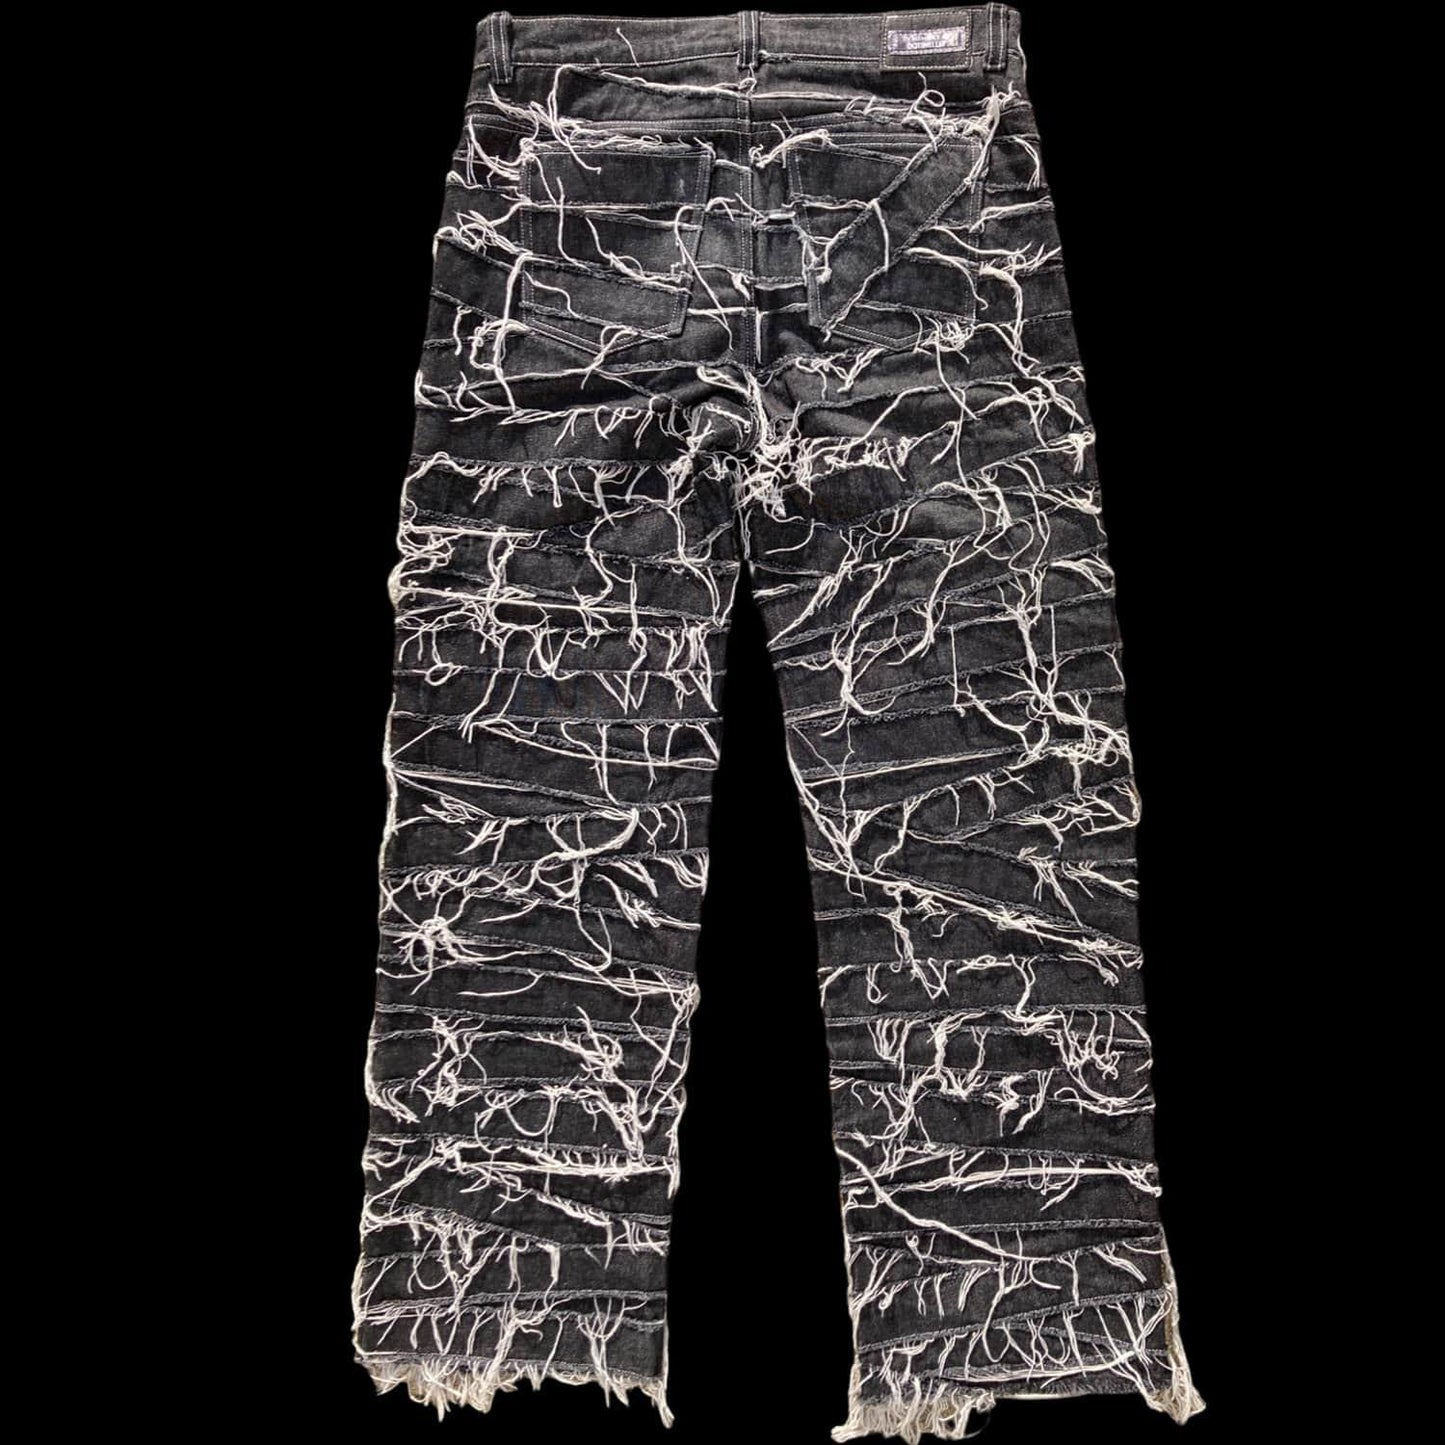 Back of the Cobweb jeans handmade by 00timeleft